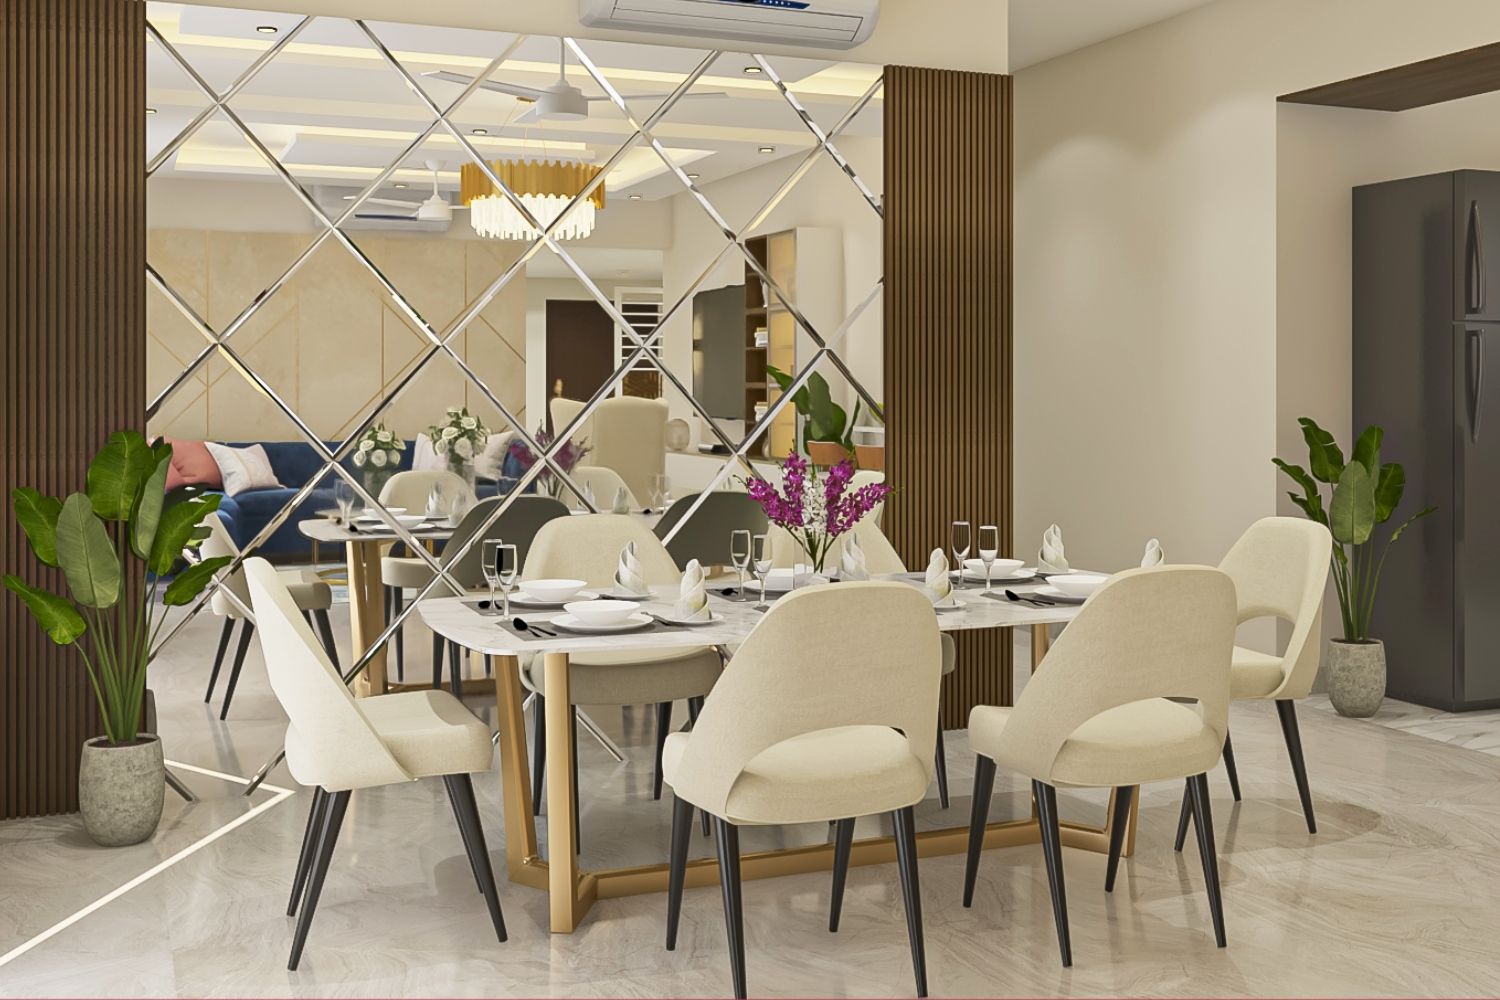 Contemporary White And Beige 6-Seater Dining Room Design With Bevelled Mirror Accent Wall